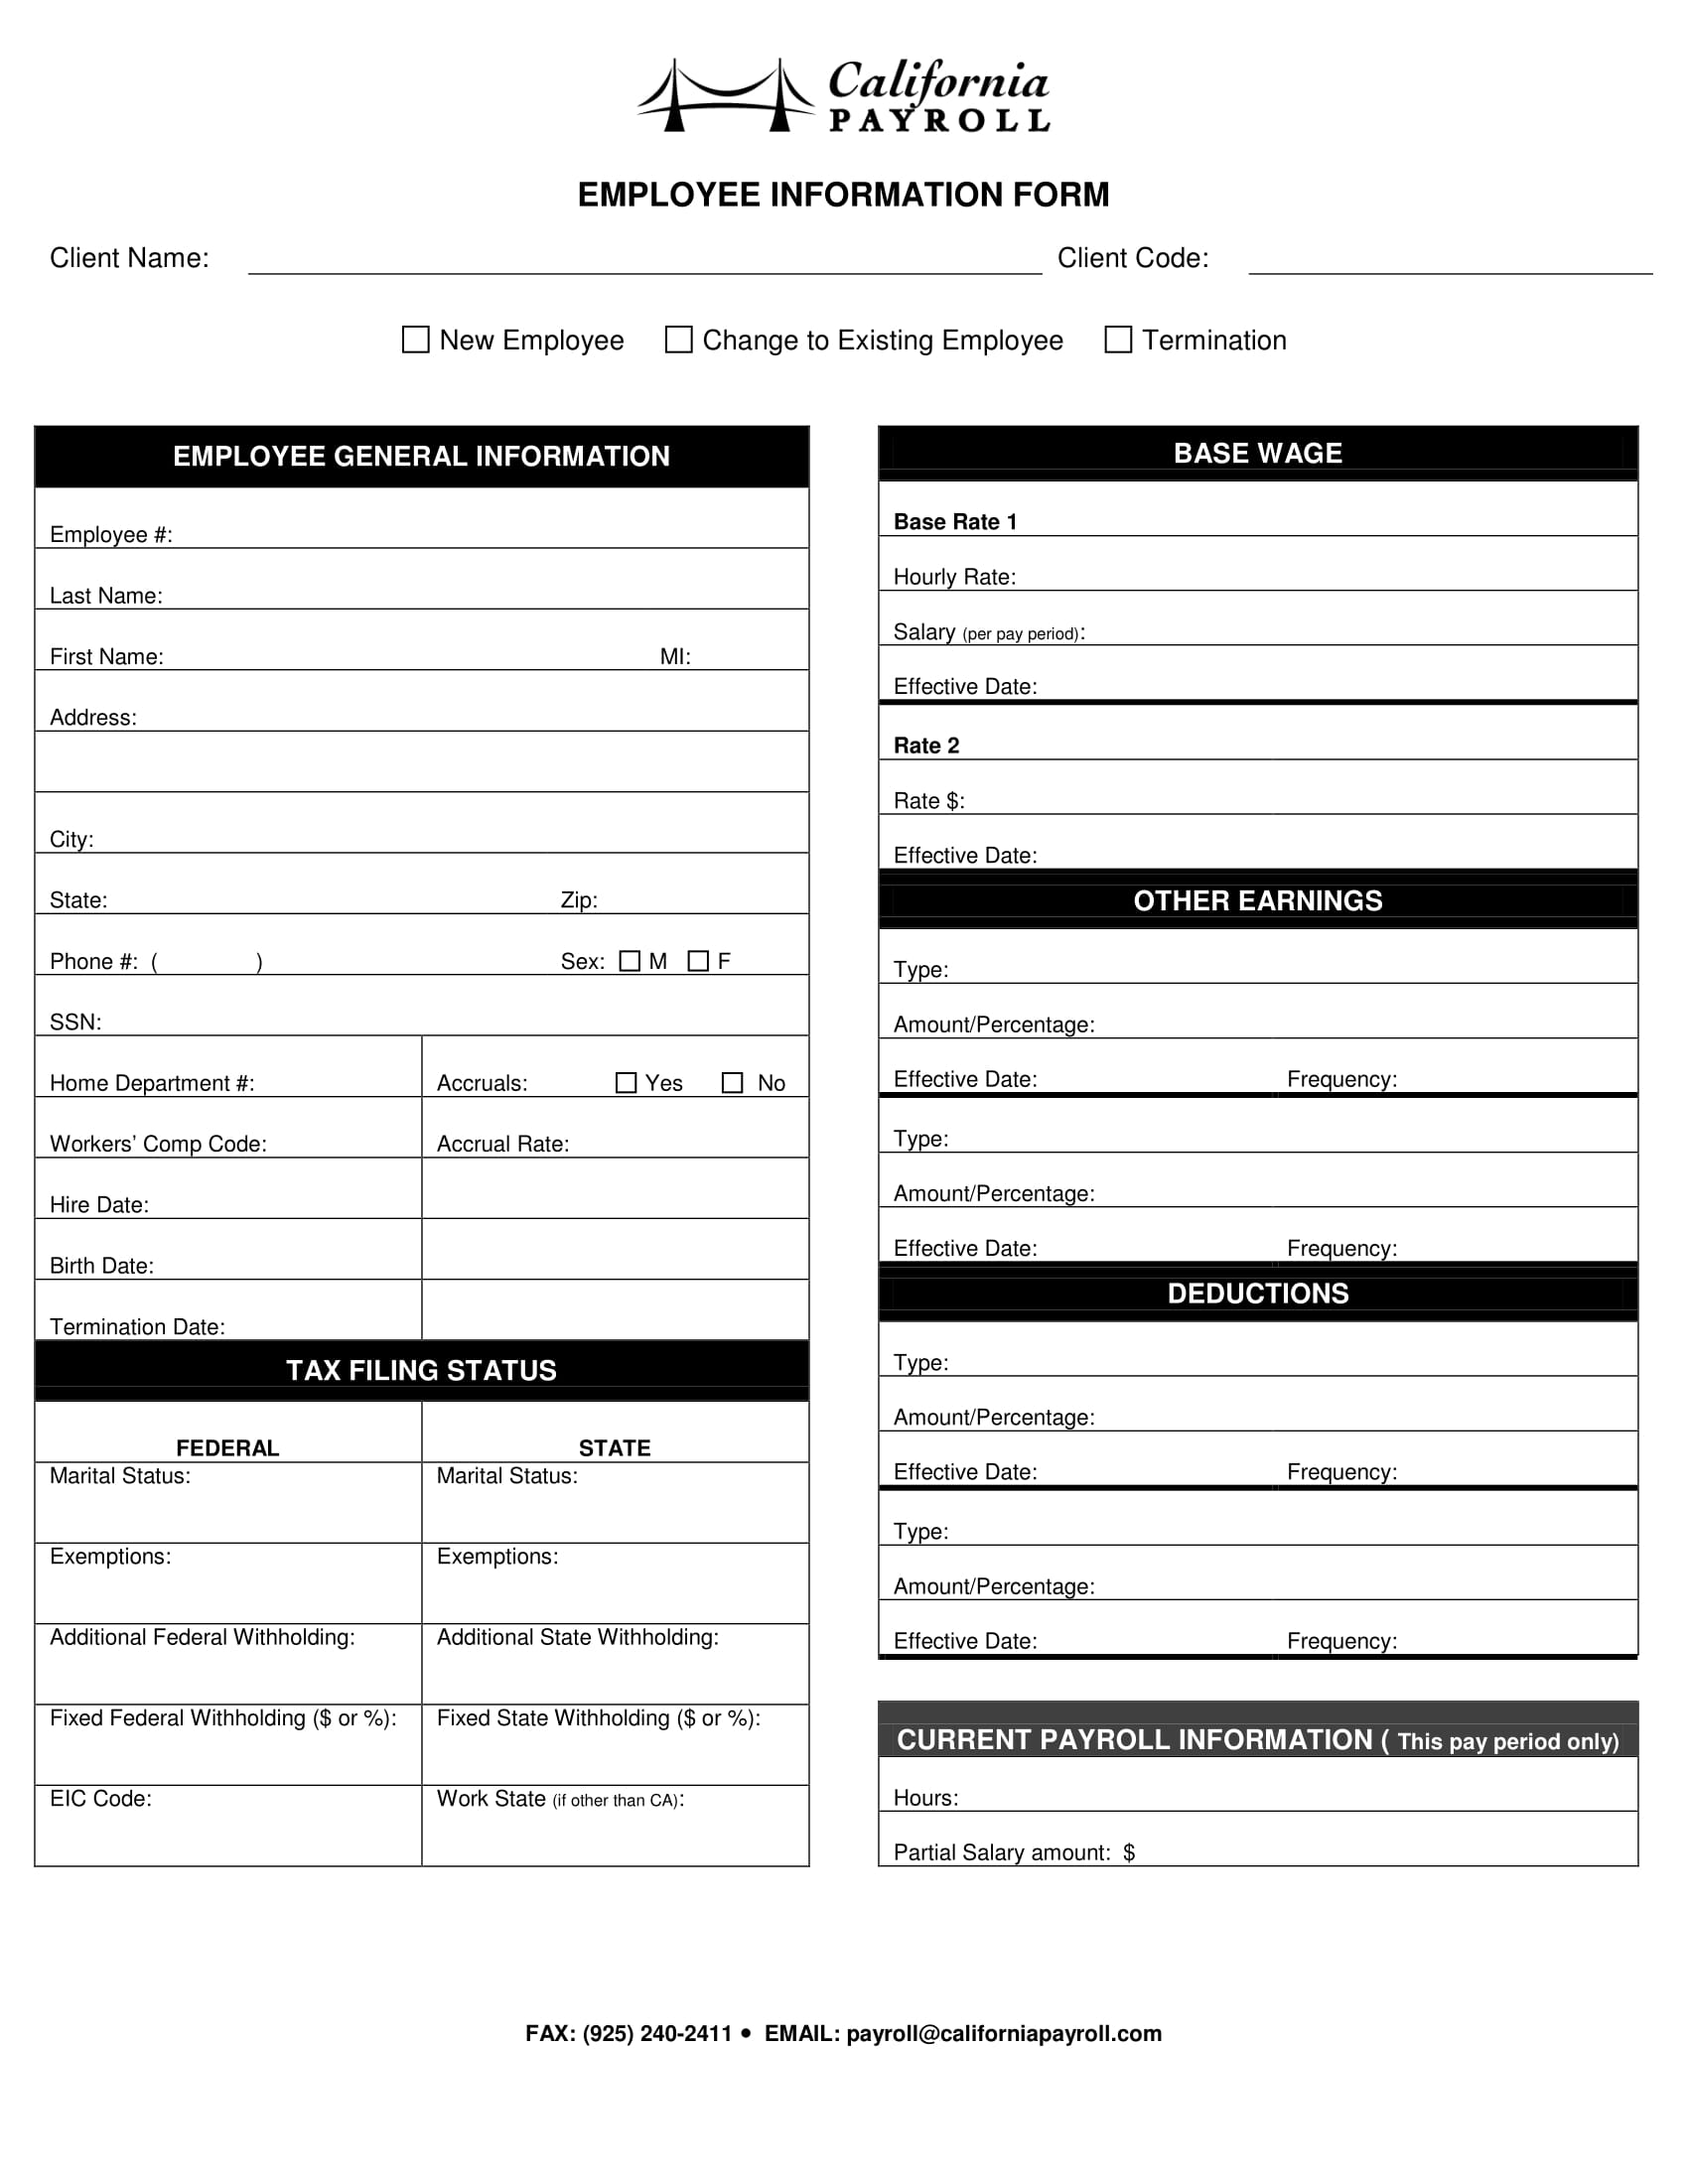 fillable employee information sample form 1